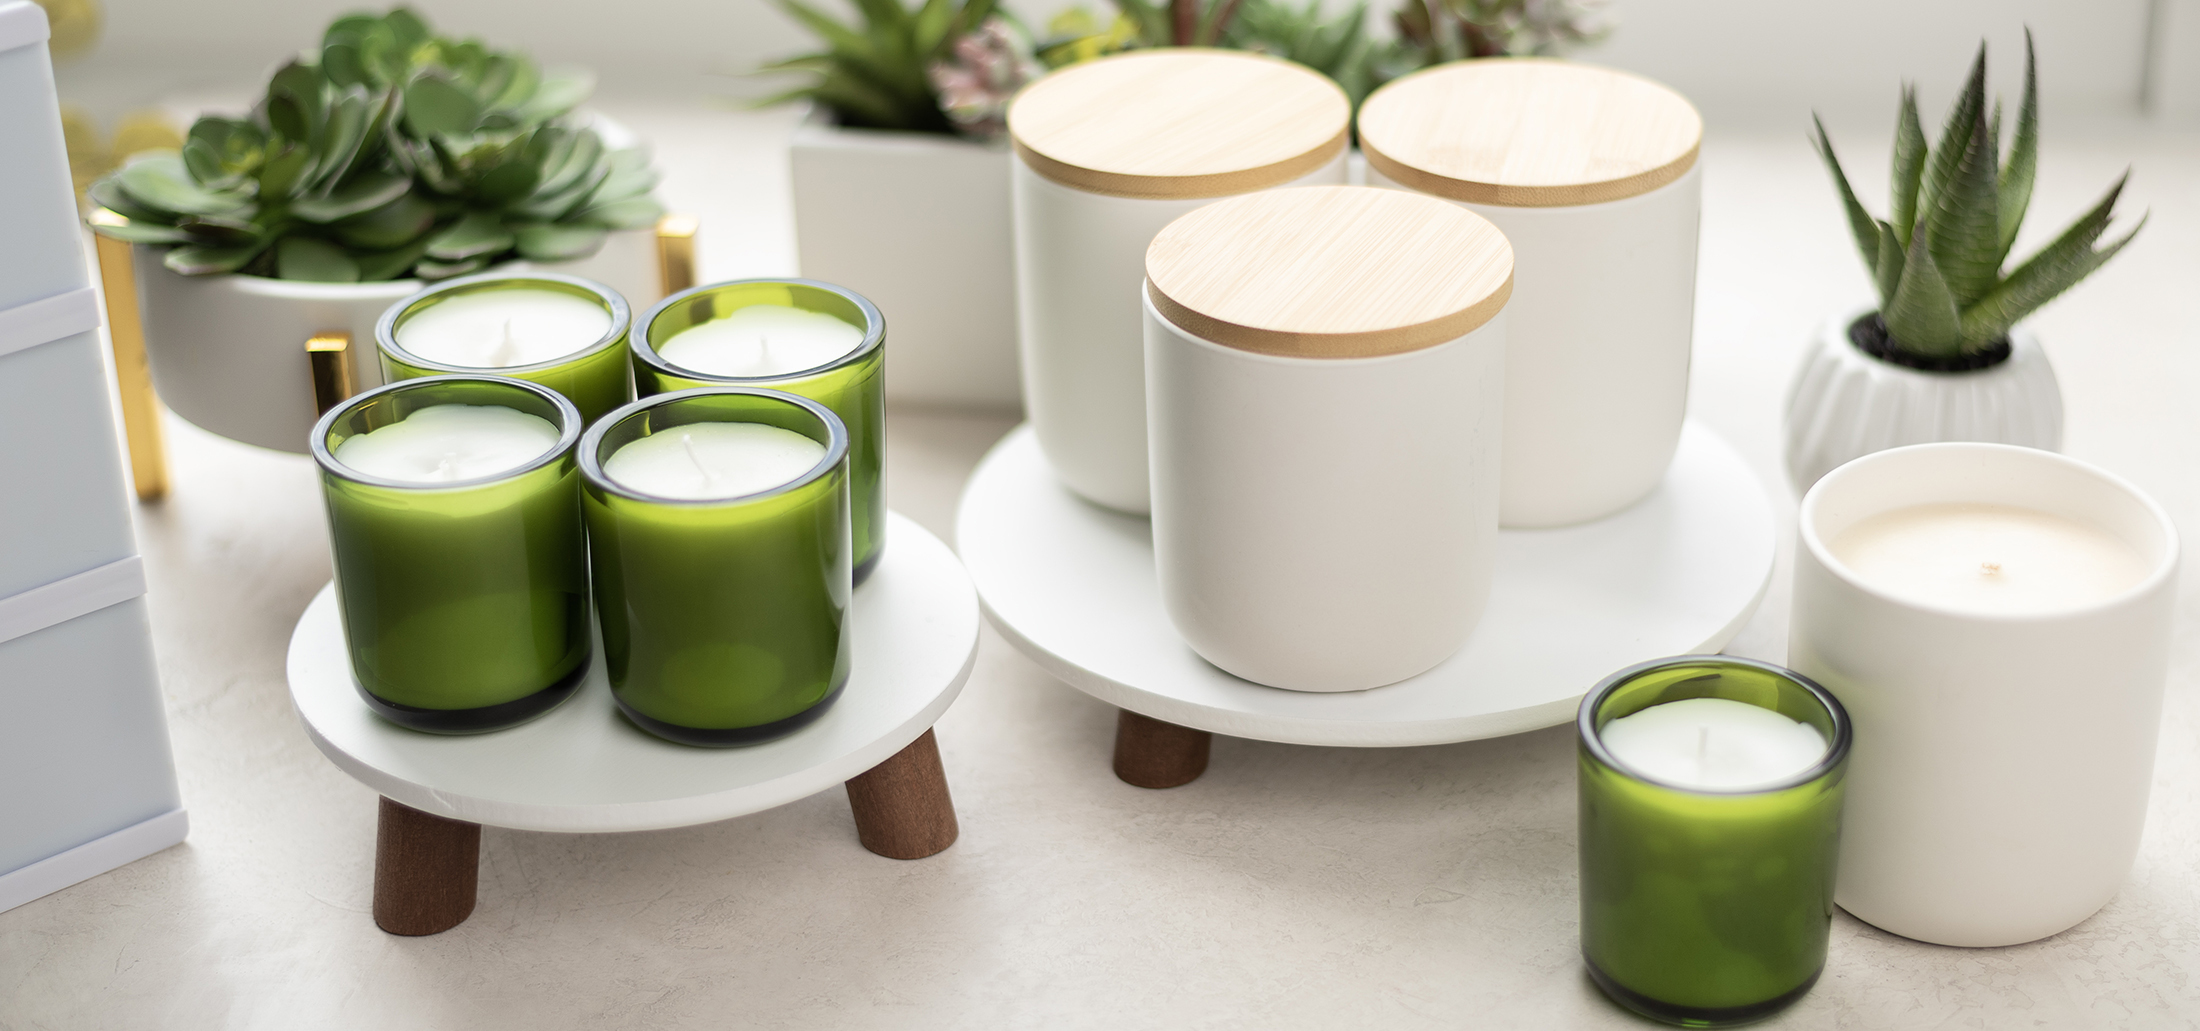 Soy wax candles made in translucent green glass Sonoma jars and white ceramic Nordic tumblers with wood lids are arranged on white risers on a marble surface, and are surrounded by succulents in white pots